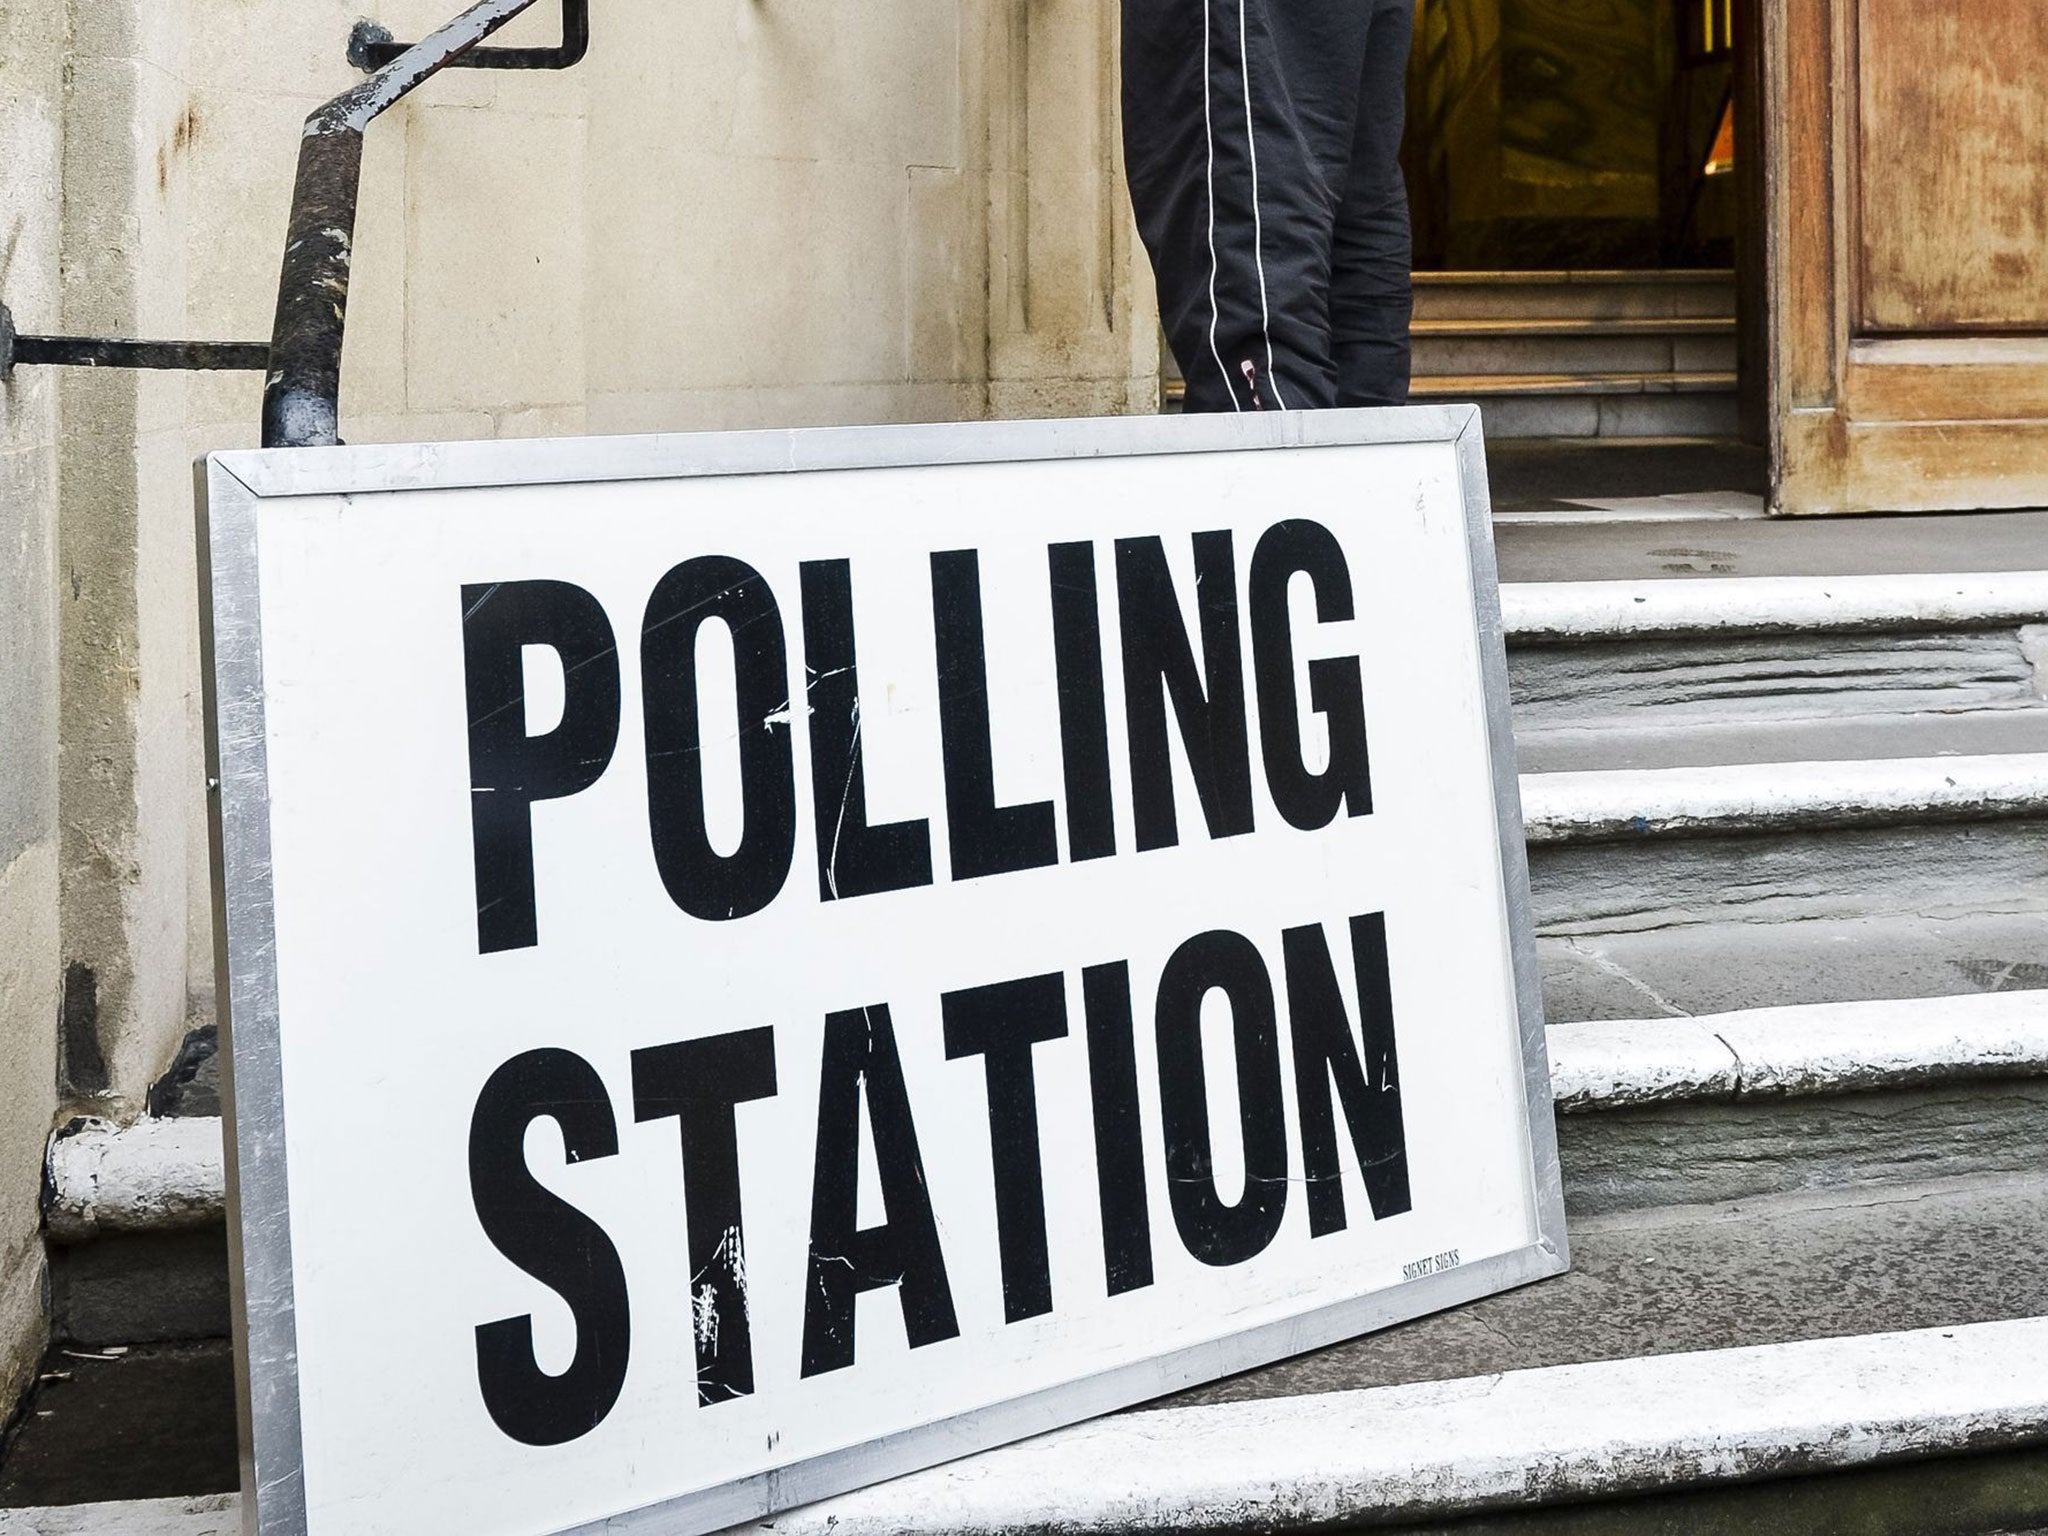 Polling stations will be open on the day of the election from 7am until 10pm